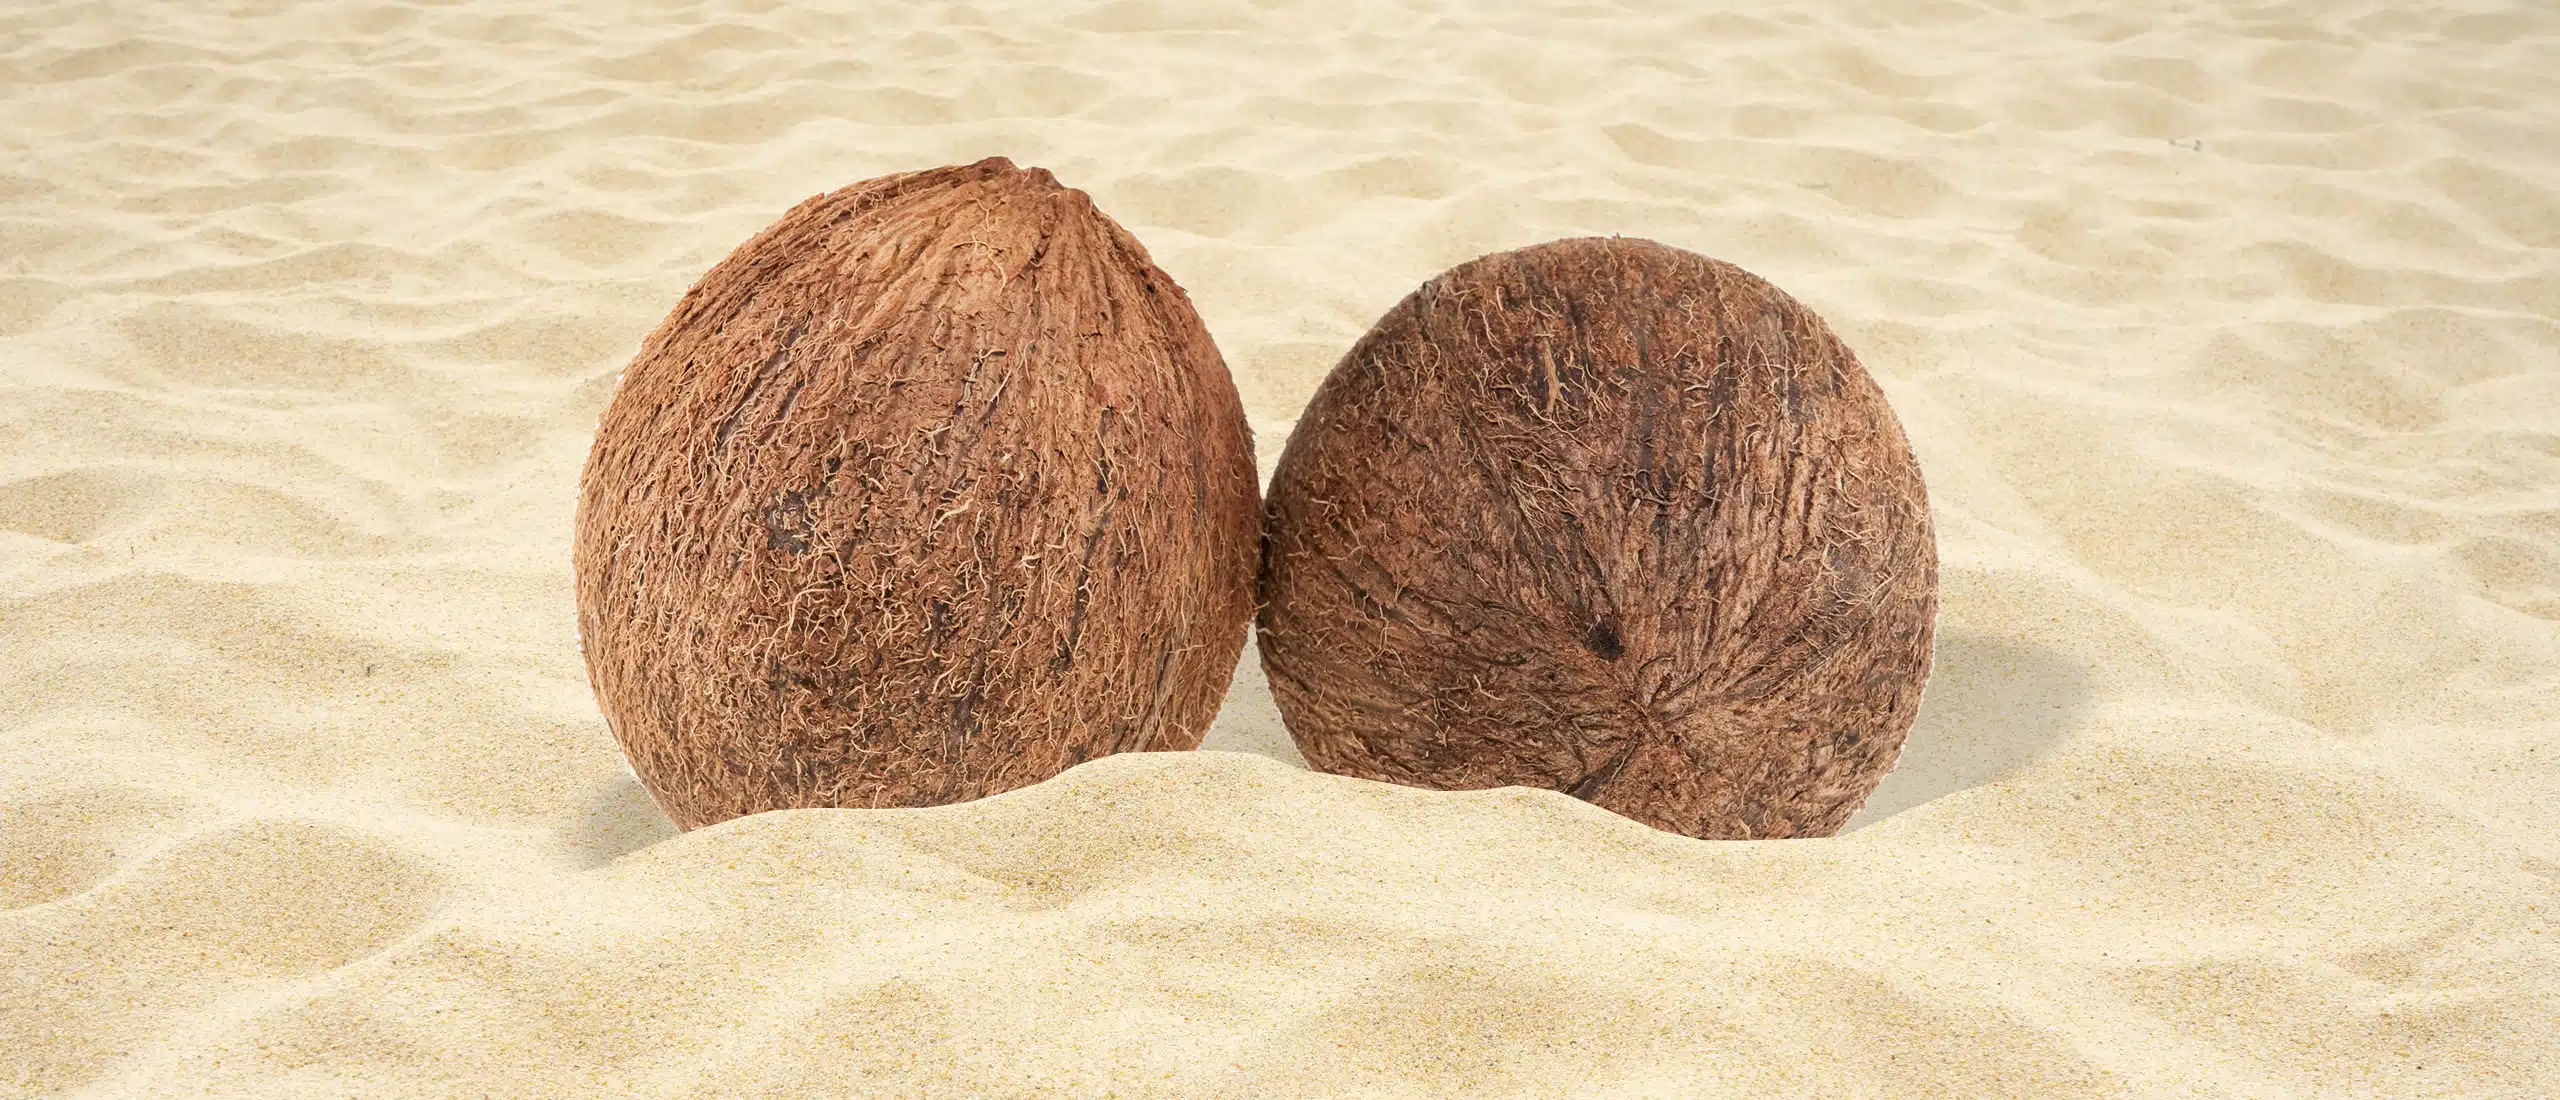 Two coconuts side by side in the sand